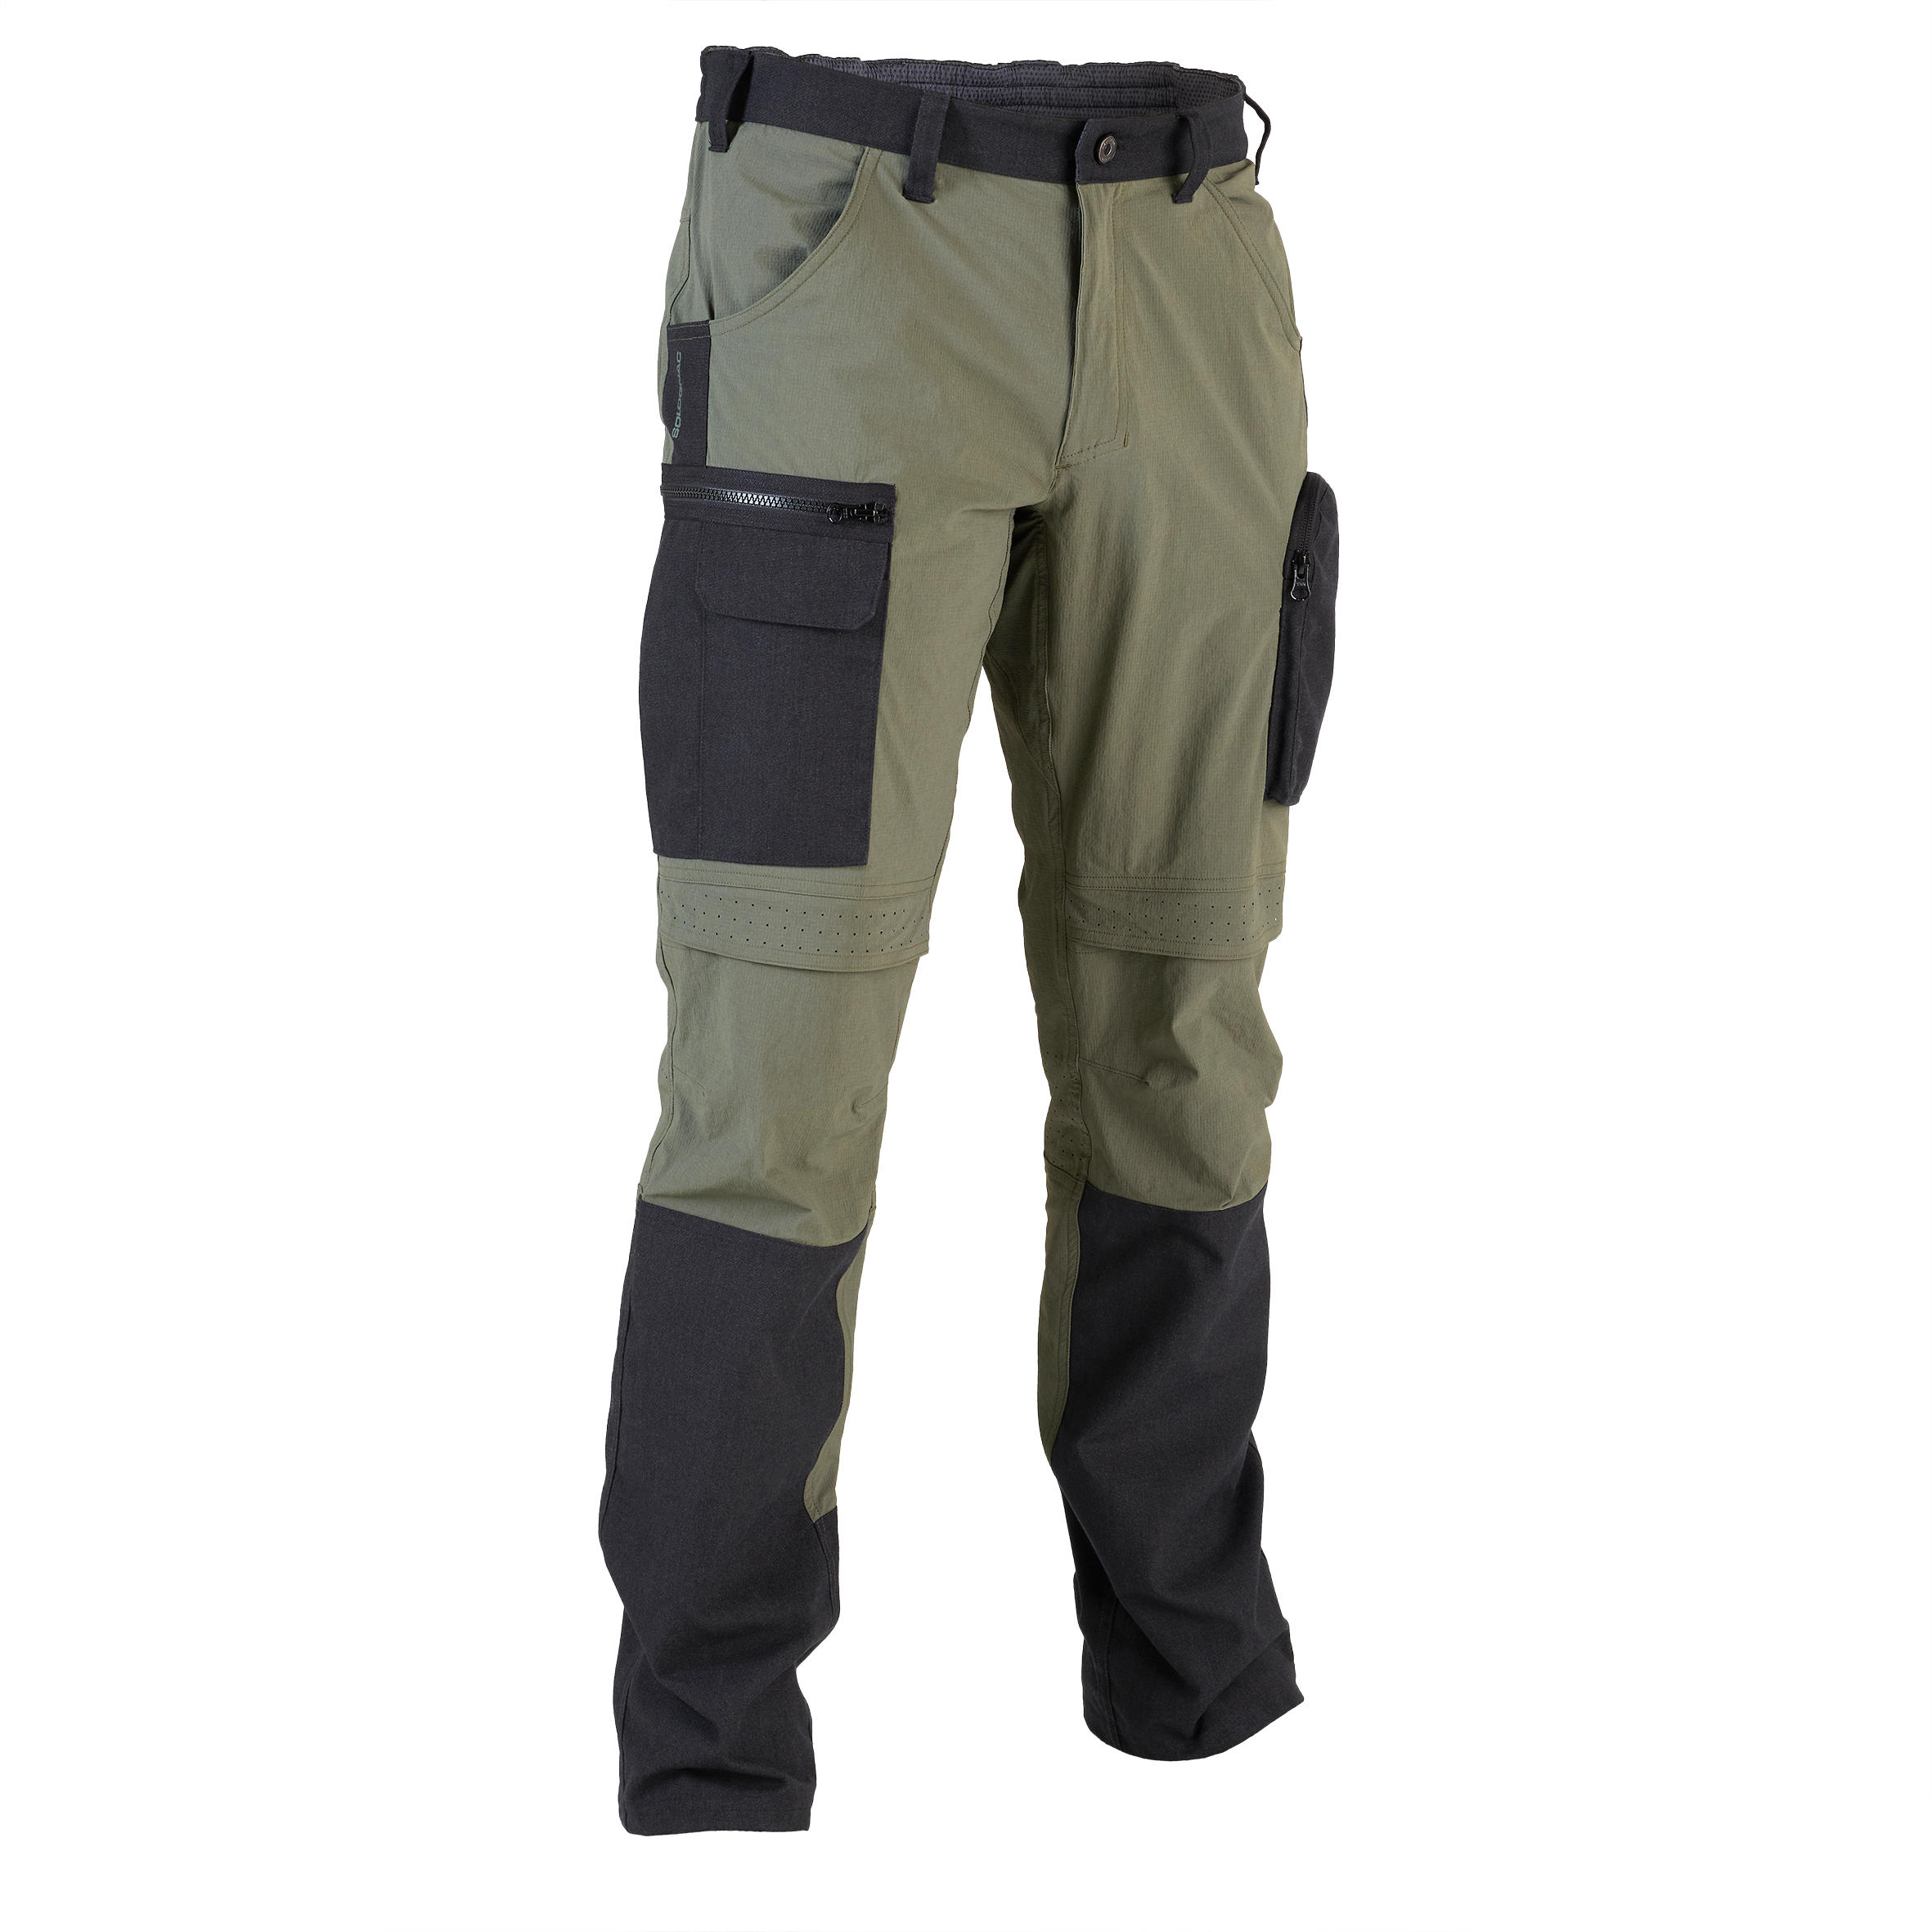 Mens Breathable Trousers Pants 900 Green